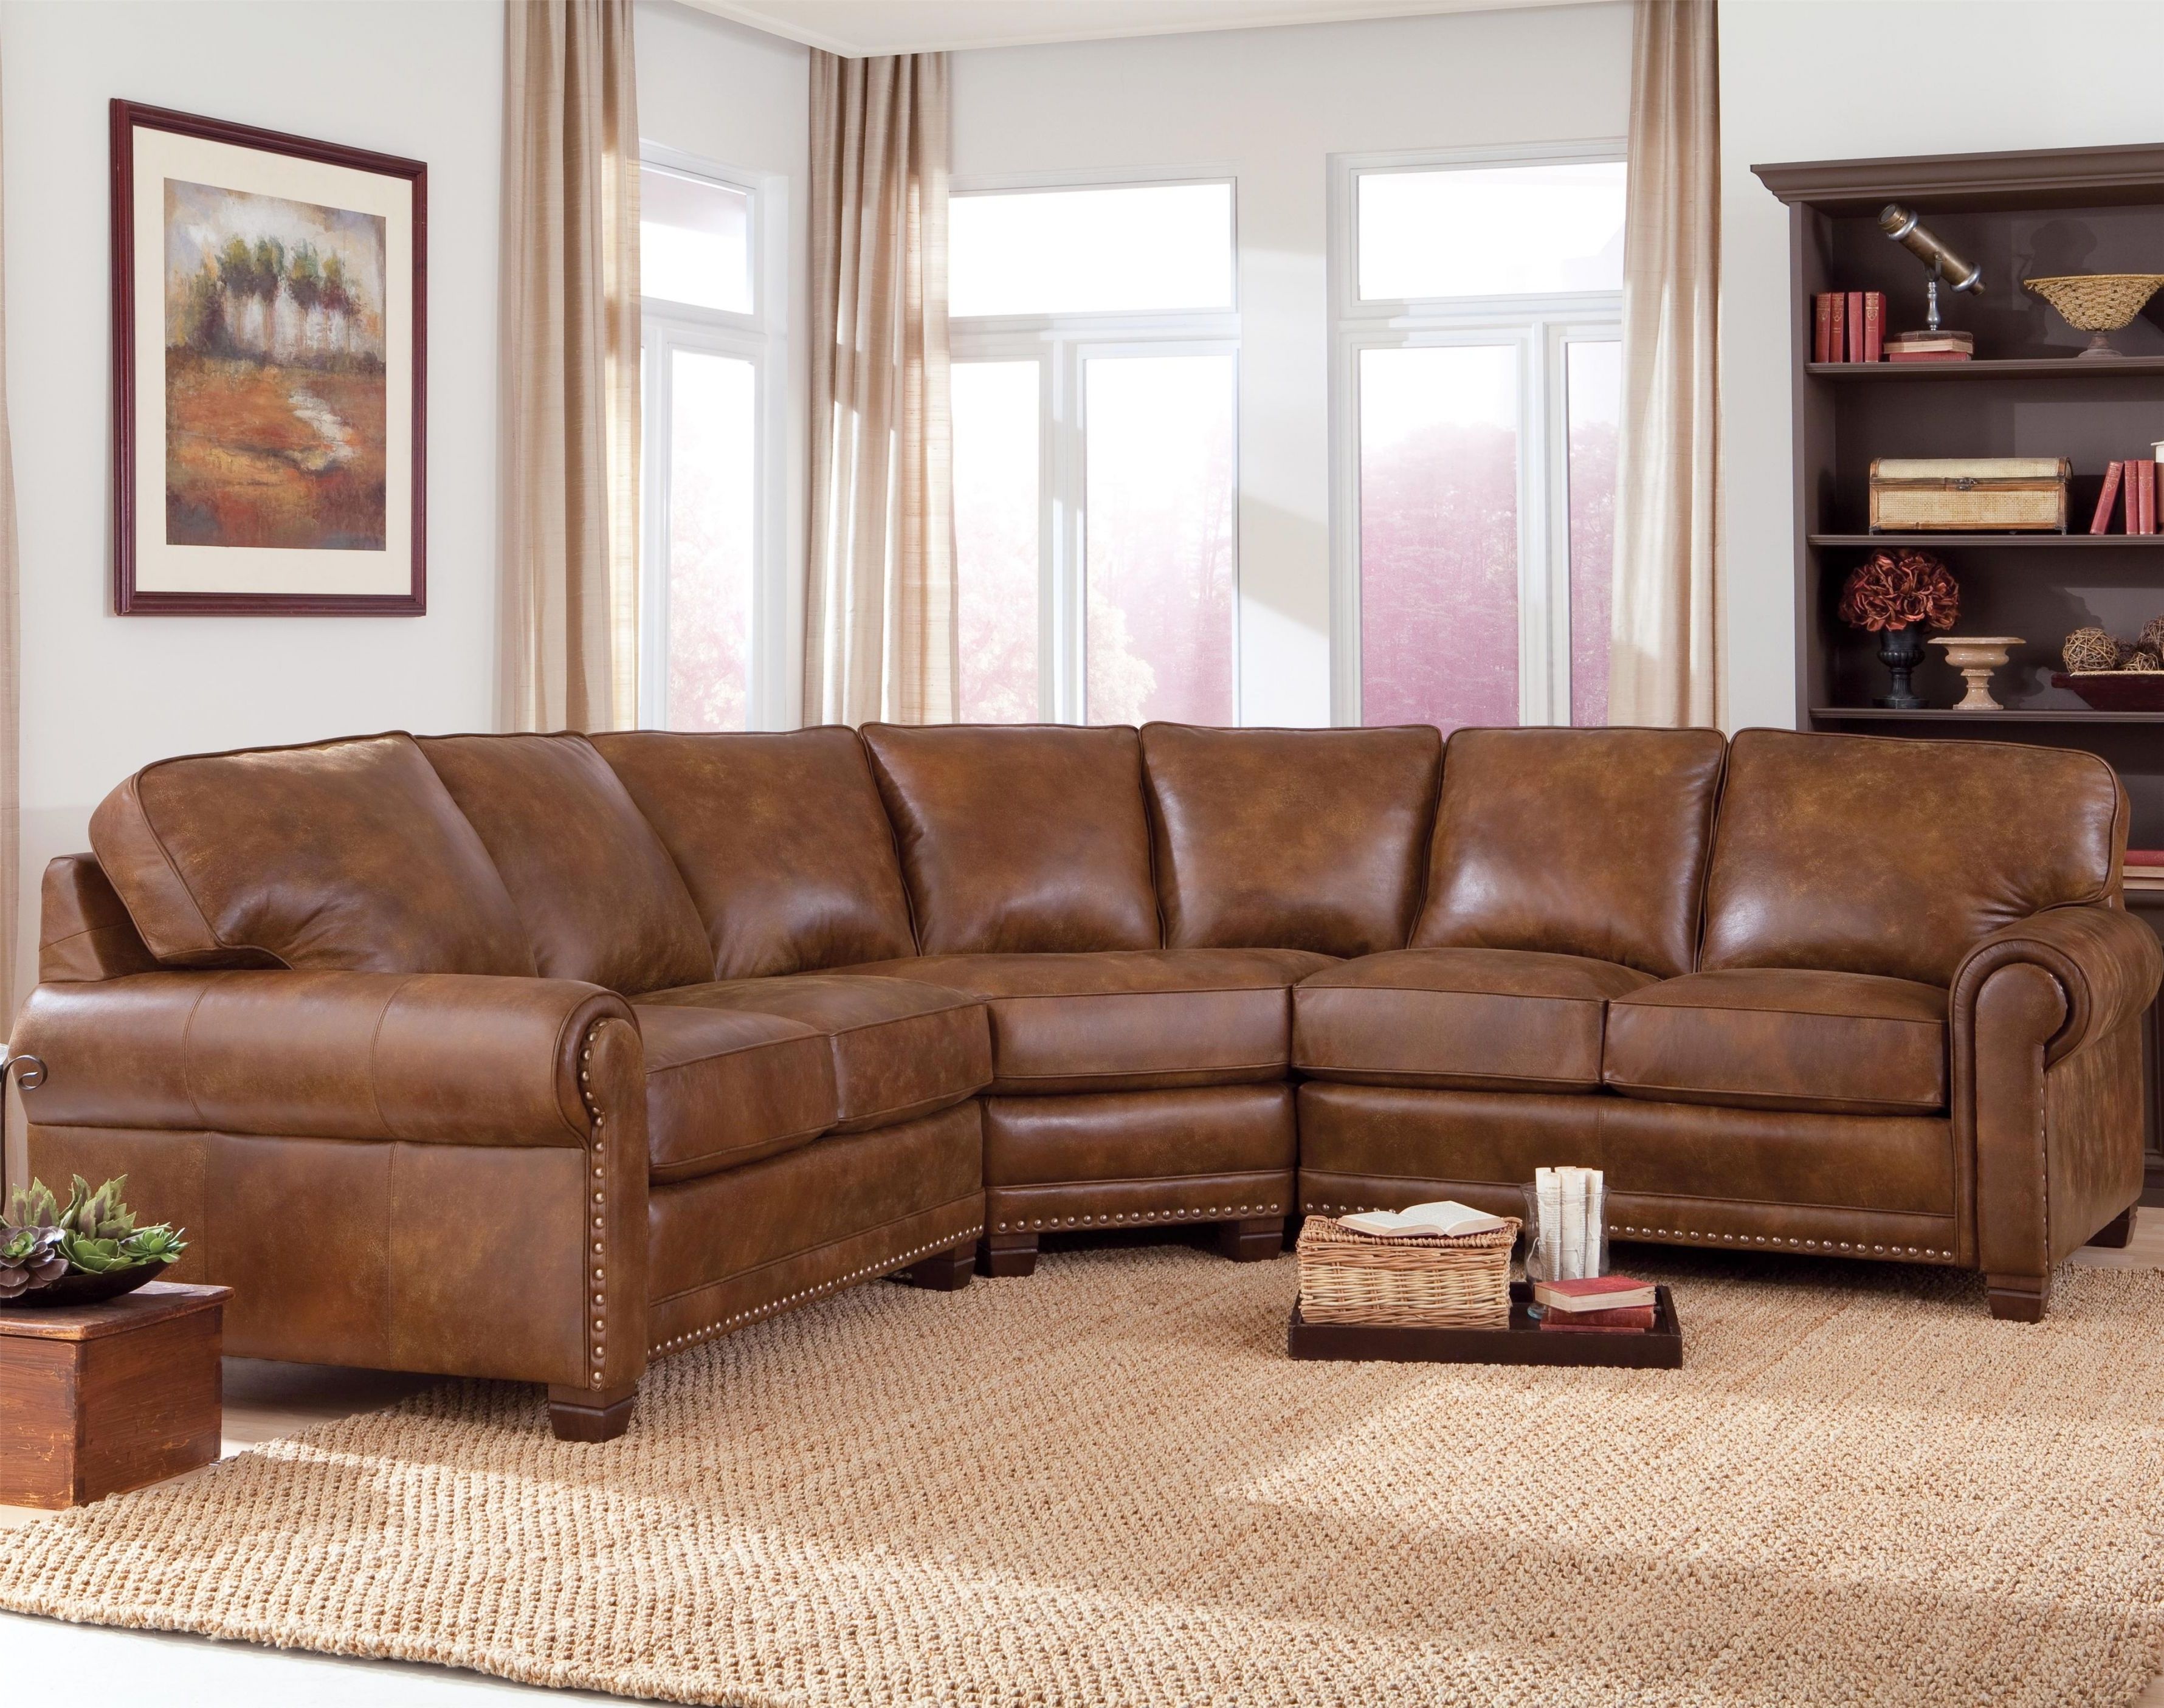 Nailhead Trim Sectional Sofa Great Pictures #1 Sofa With Nailhead For Most Up To Date Sectional Sofas At Buffalo Ny (View 14 of 20)